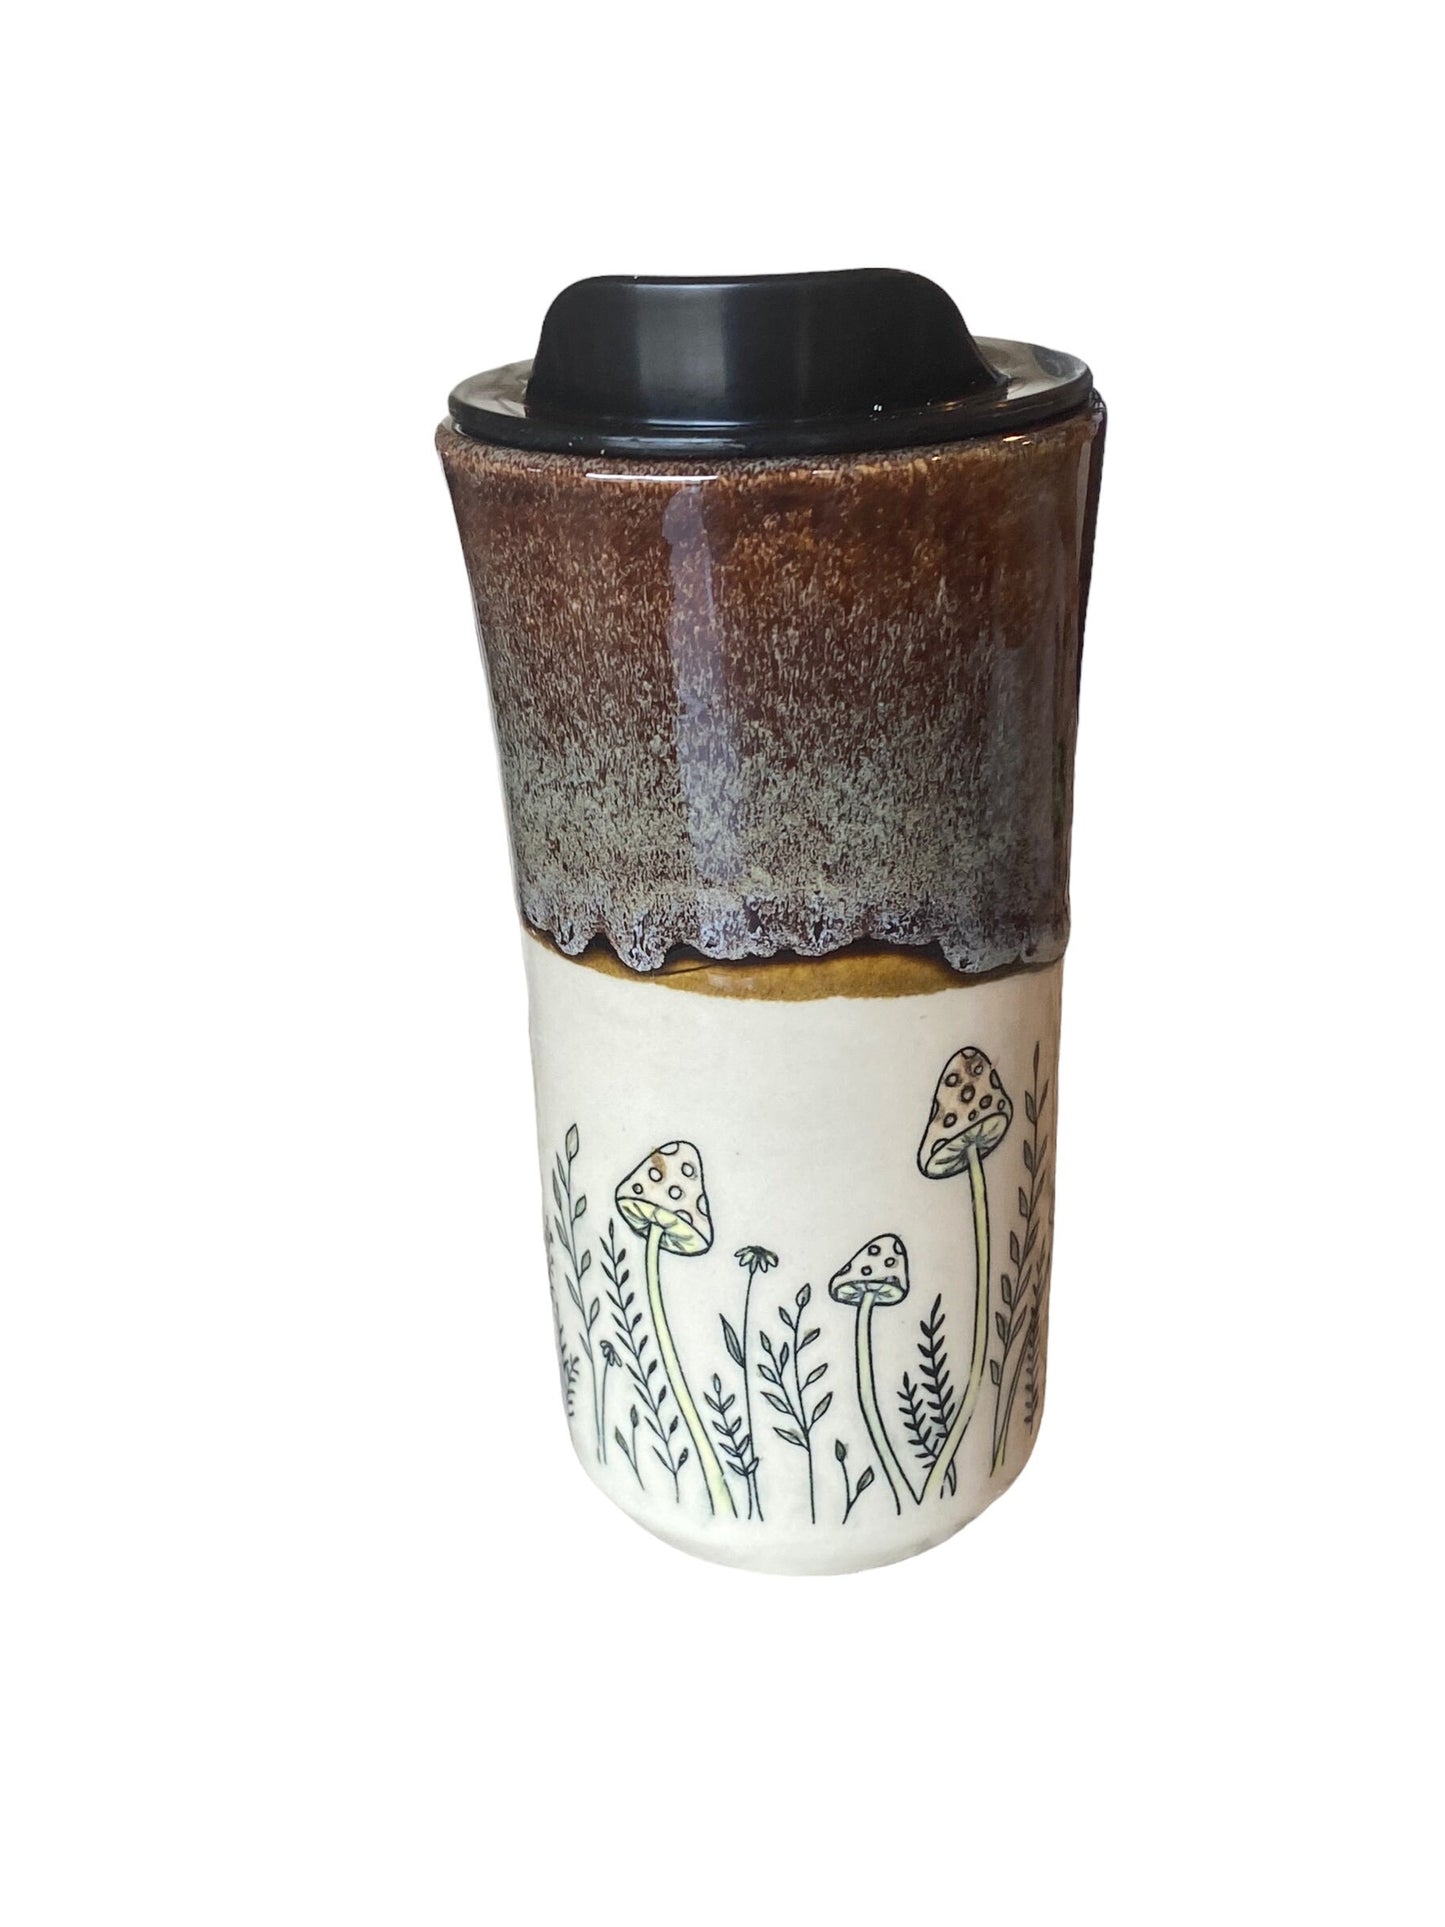 Handmade 16-Ounce Travel Mug with Locking Lid - Whimsically Embellished with Mushrooms for a Unique On-the-Go Experience